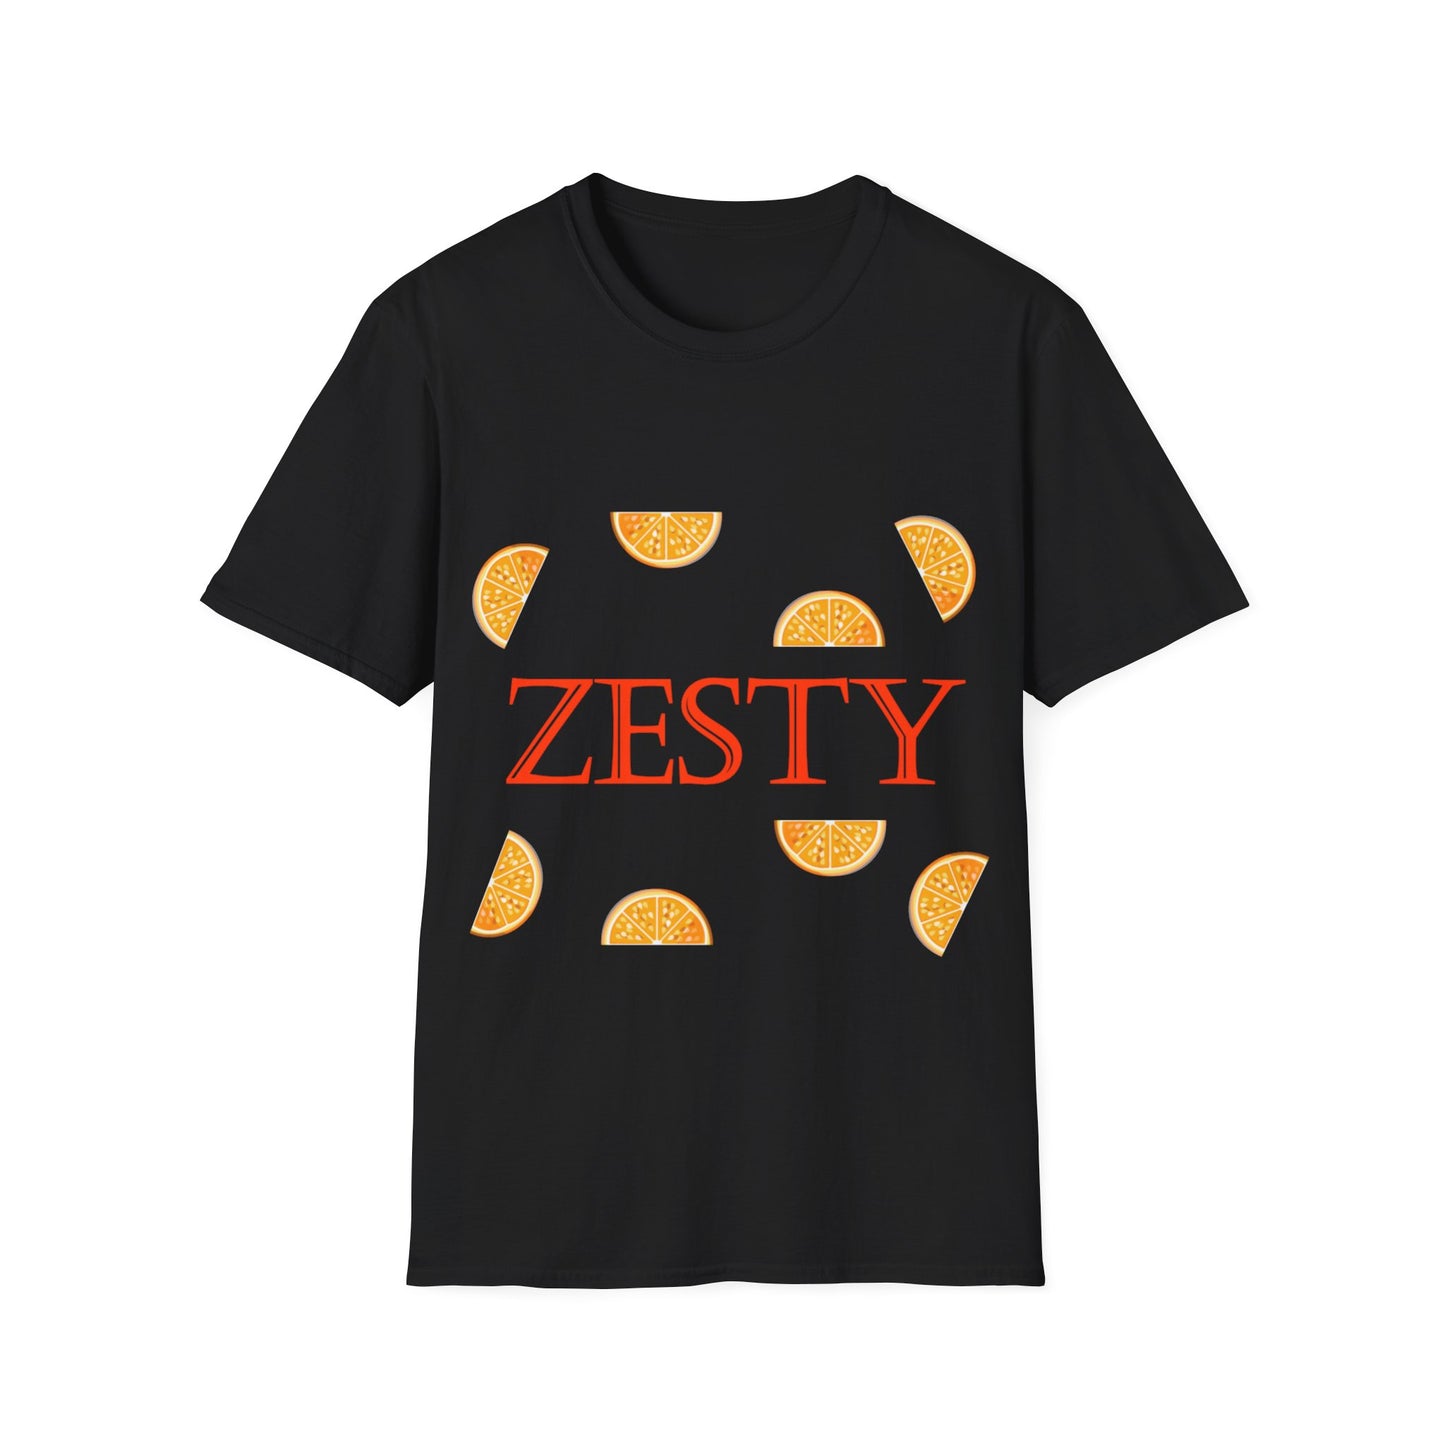 A black t-shirt with the word Zesty written in bright orange and surrounded with orange fruit slices